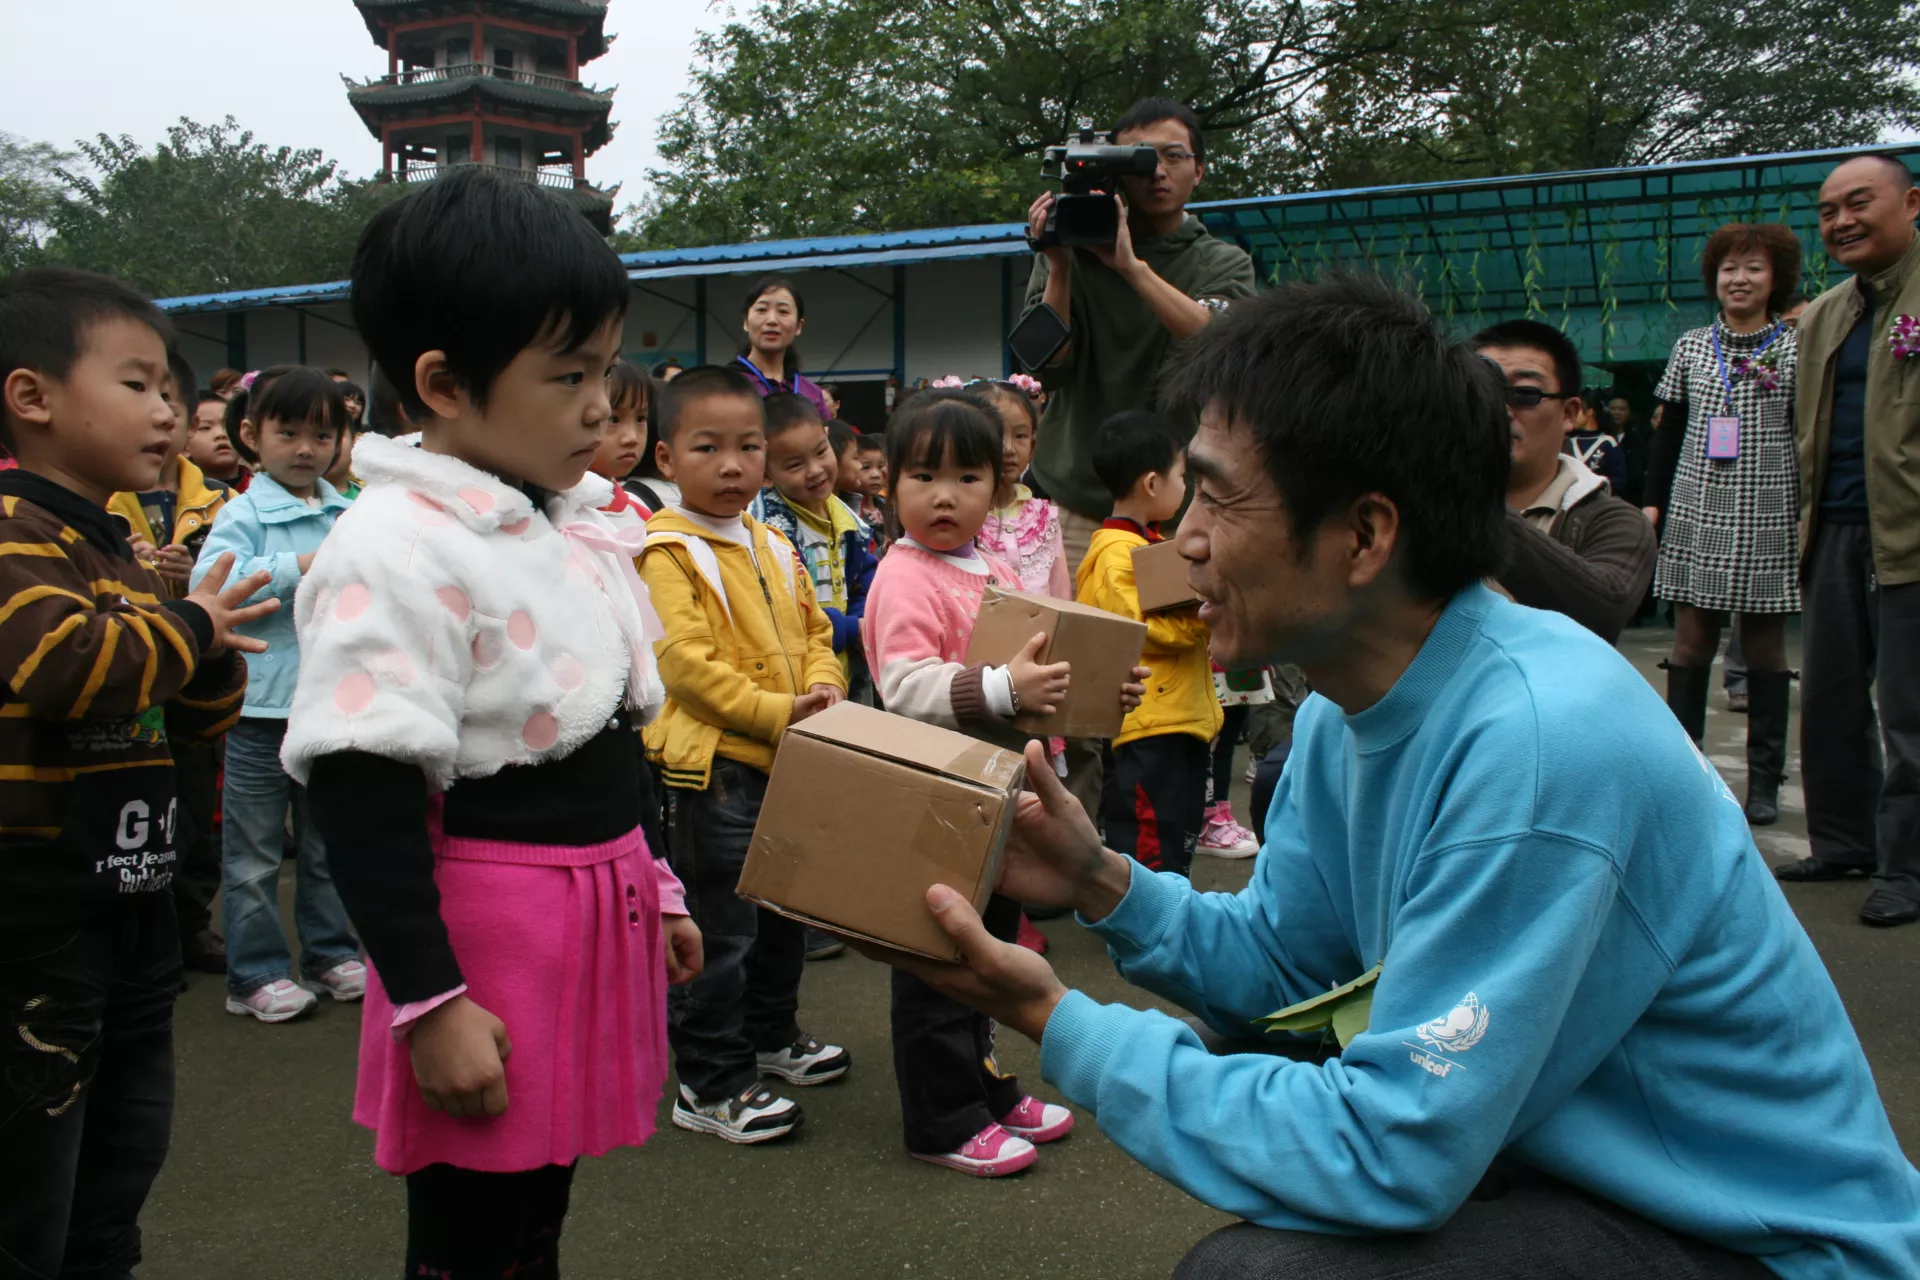 Dr. Yang Zhenbo (in blue), UNICEF China's Water, Sanitation and Hygiene Specialist, presents a UNICEF-provided hygiene kit to a girl in Shifang City Second Kindergarten in Sichuan Province at an event on the Global Handwashing Day in 2009.